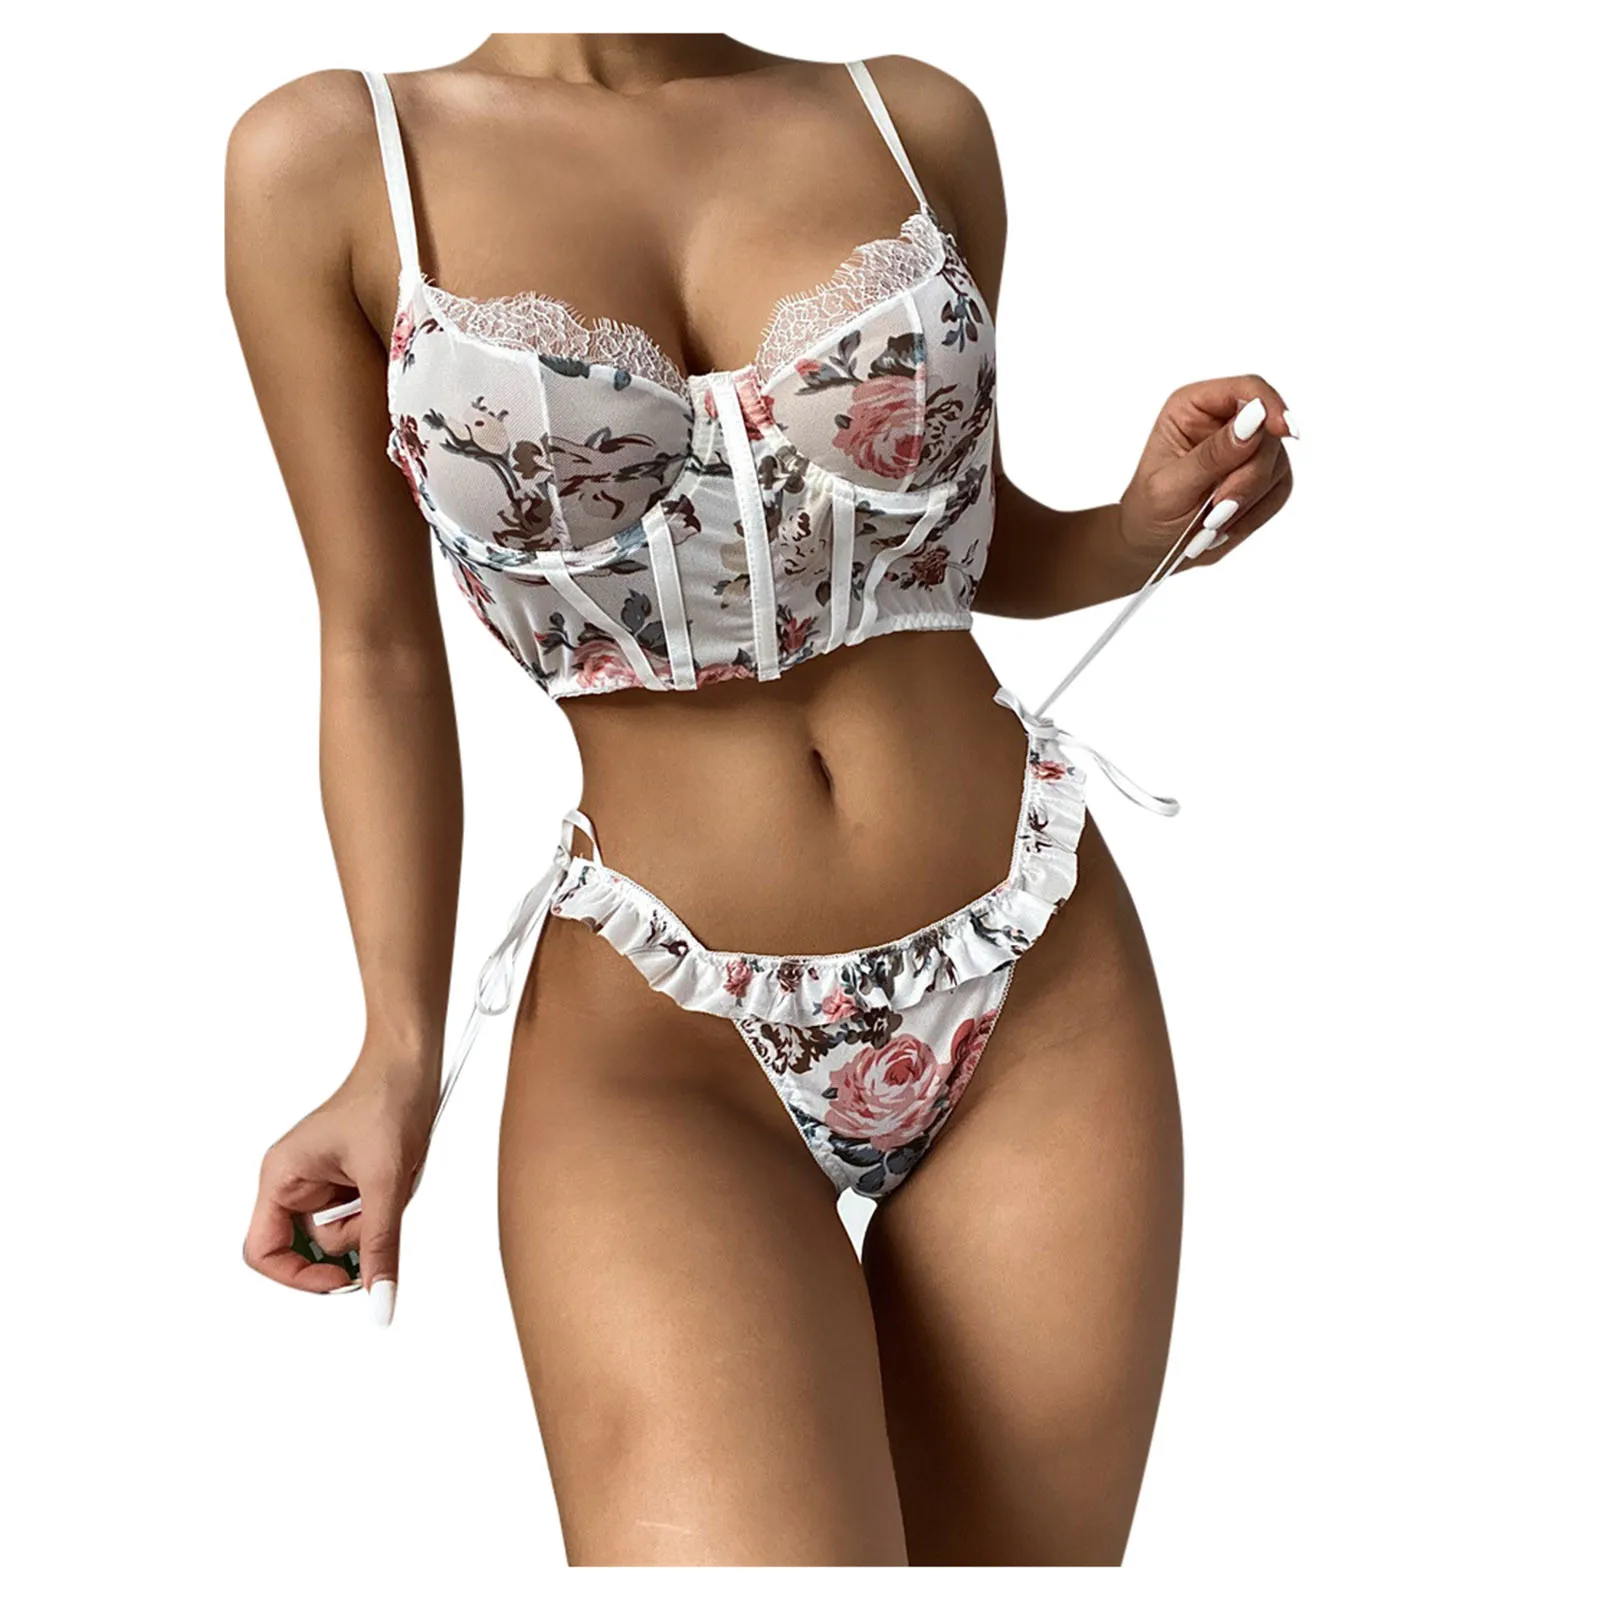 

Sexy Lace Lingerie Women Underwear Set Perspective Floral Bra And Thongs Set Lenceria Sensual Mujer Babydoll Hot Erotic Costumes